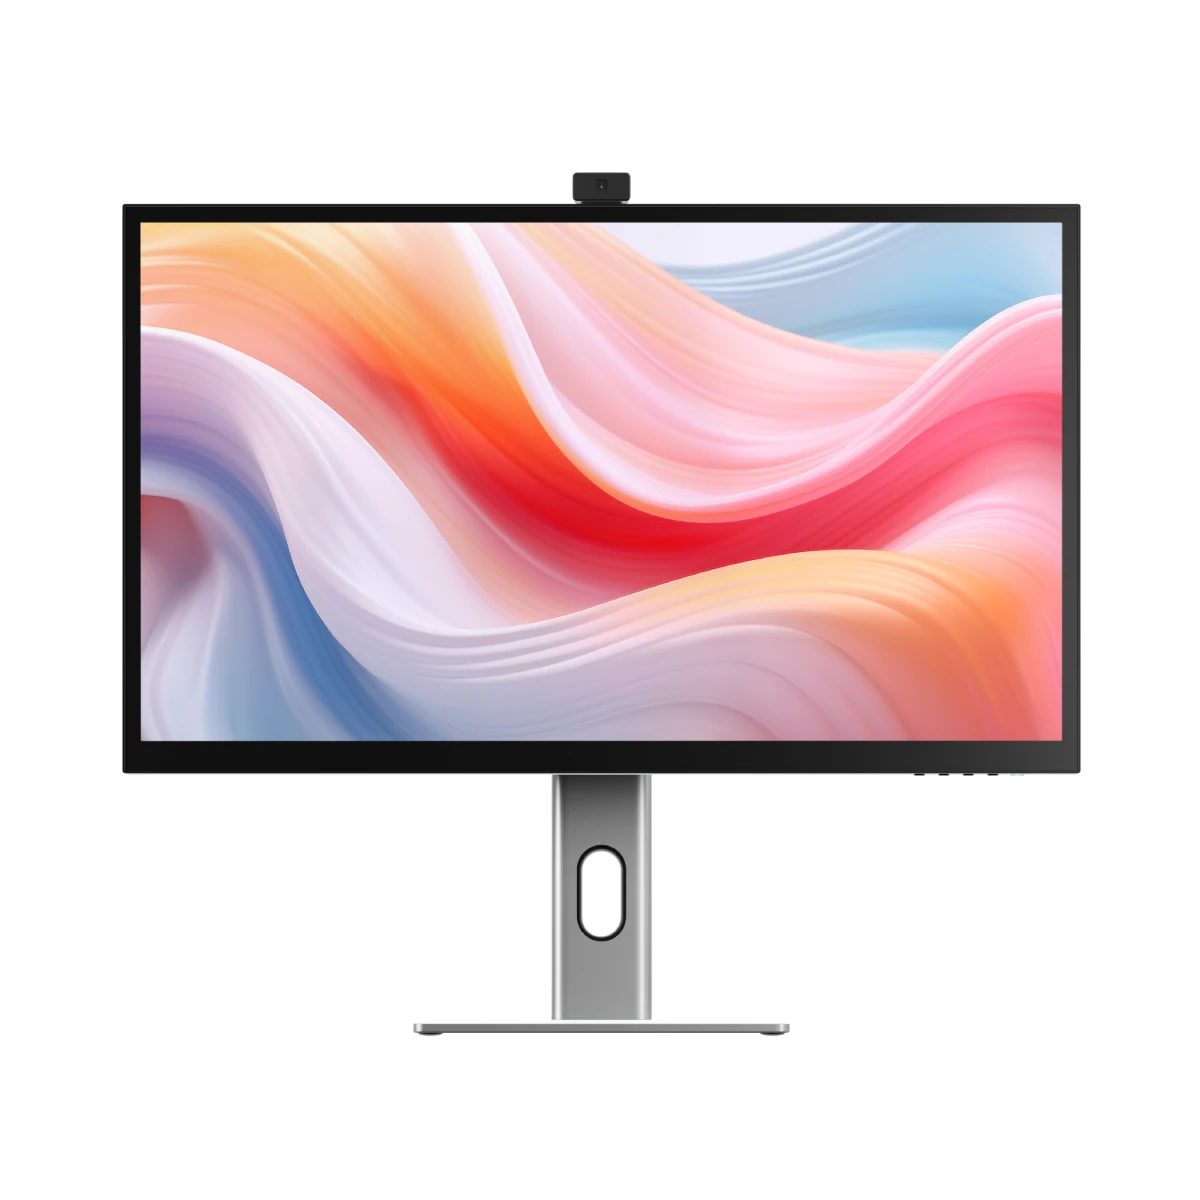 clarity-pro-27-uhd-4k-monitor-with-65w-pd-and-webcam-pack-of-2-dual-4k-universal-docking-station-displayport-edition2